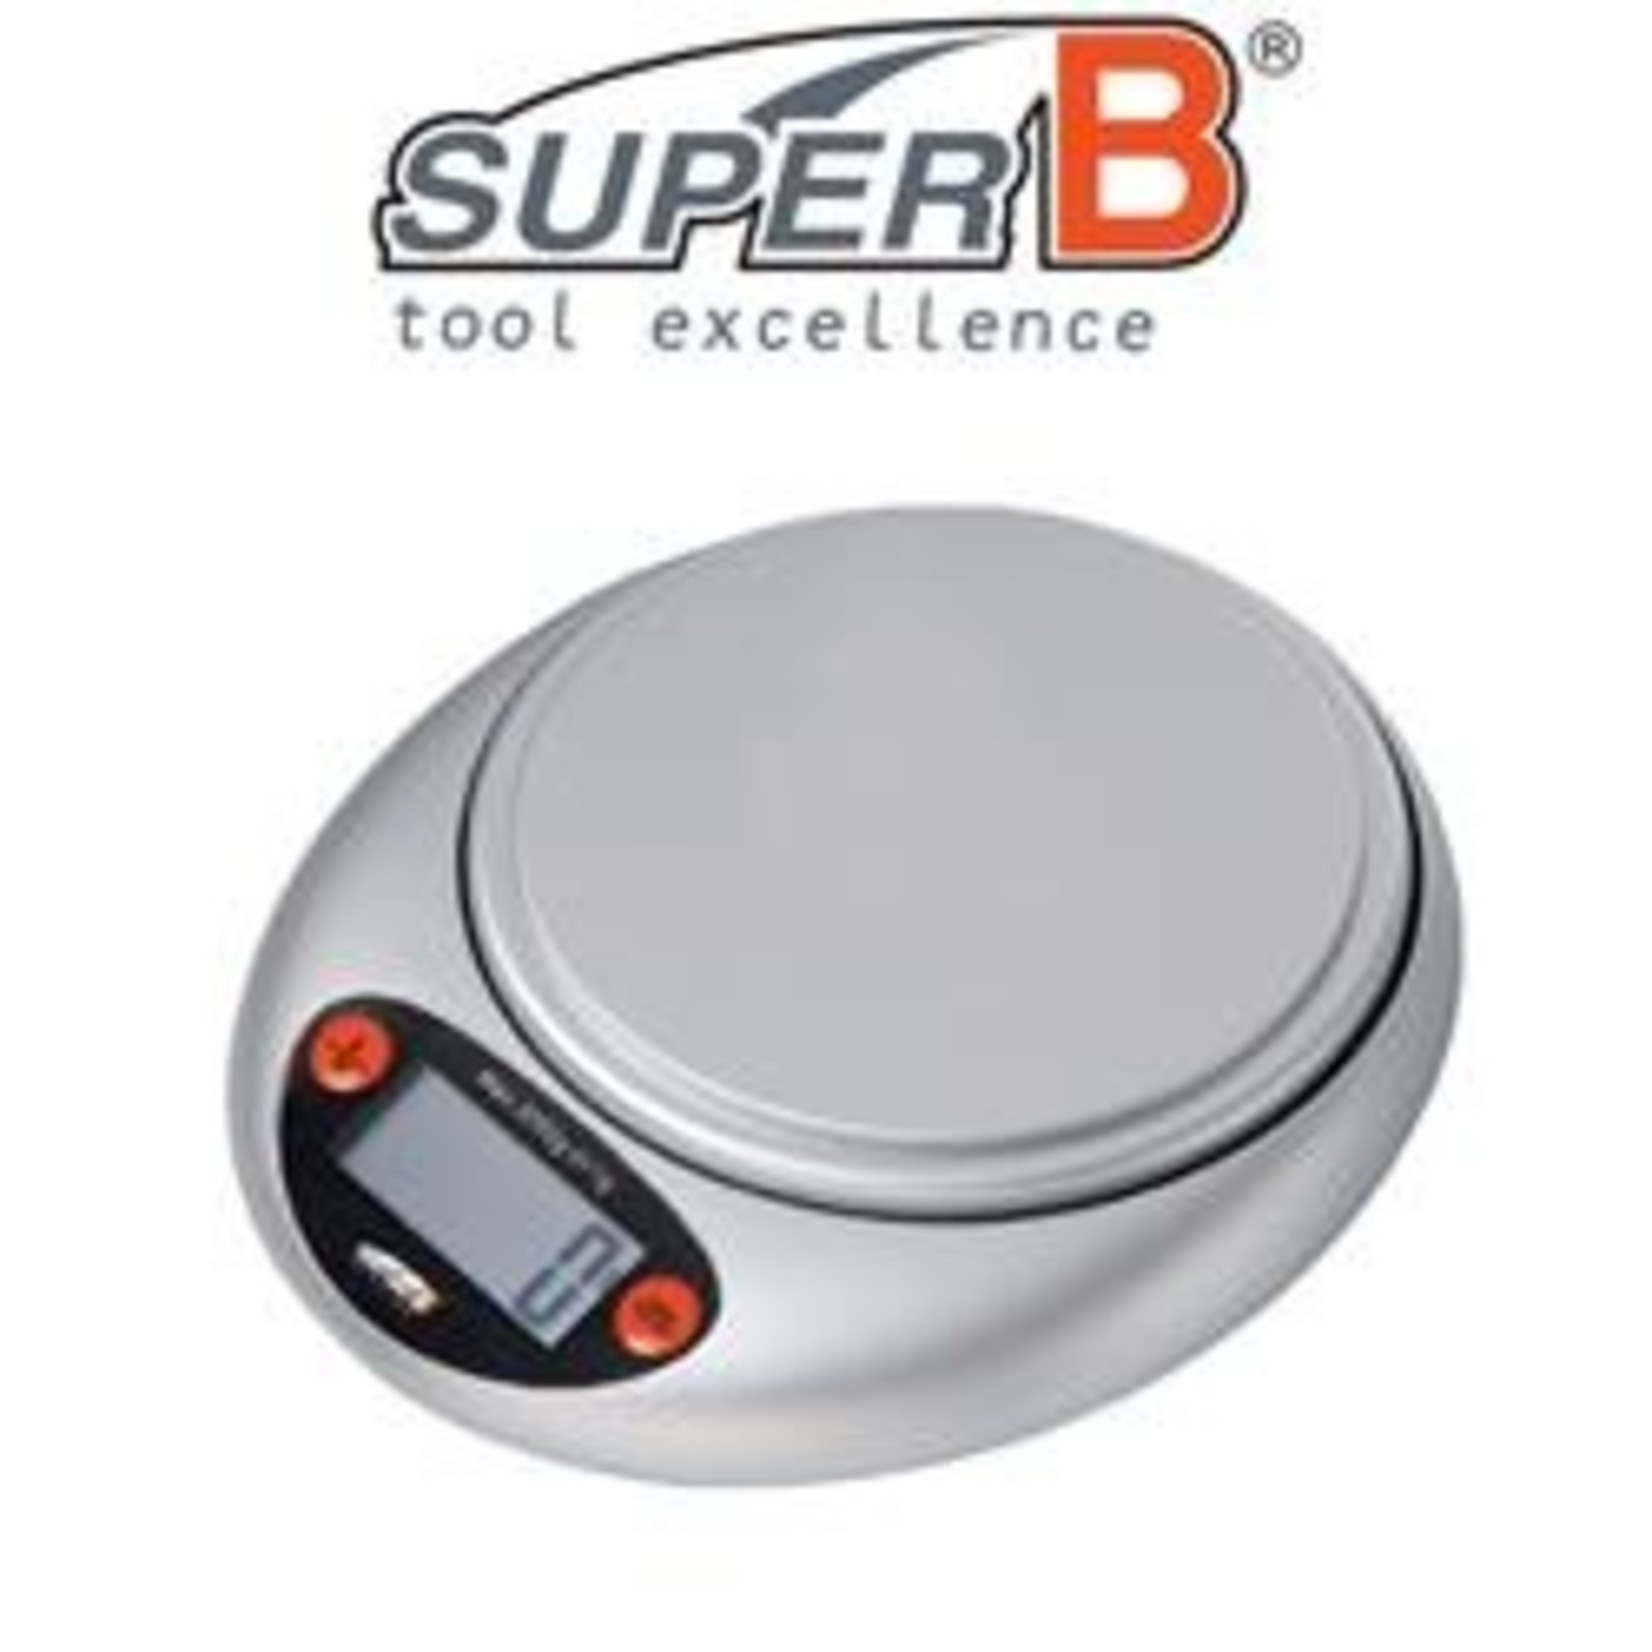 Super B SuperB Tabletop Digital Scale - Tare And Auto Power-Off Function - Bike Tool